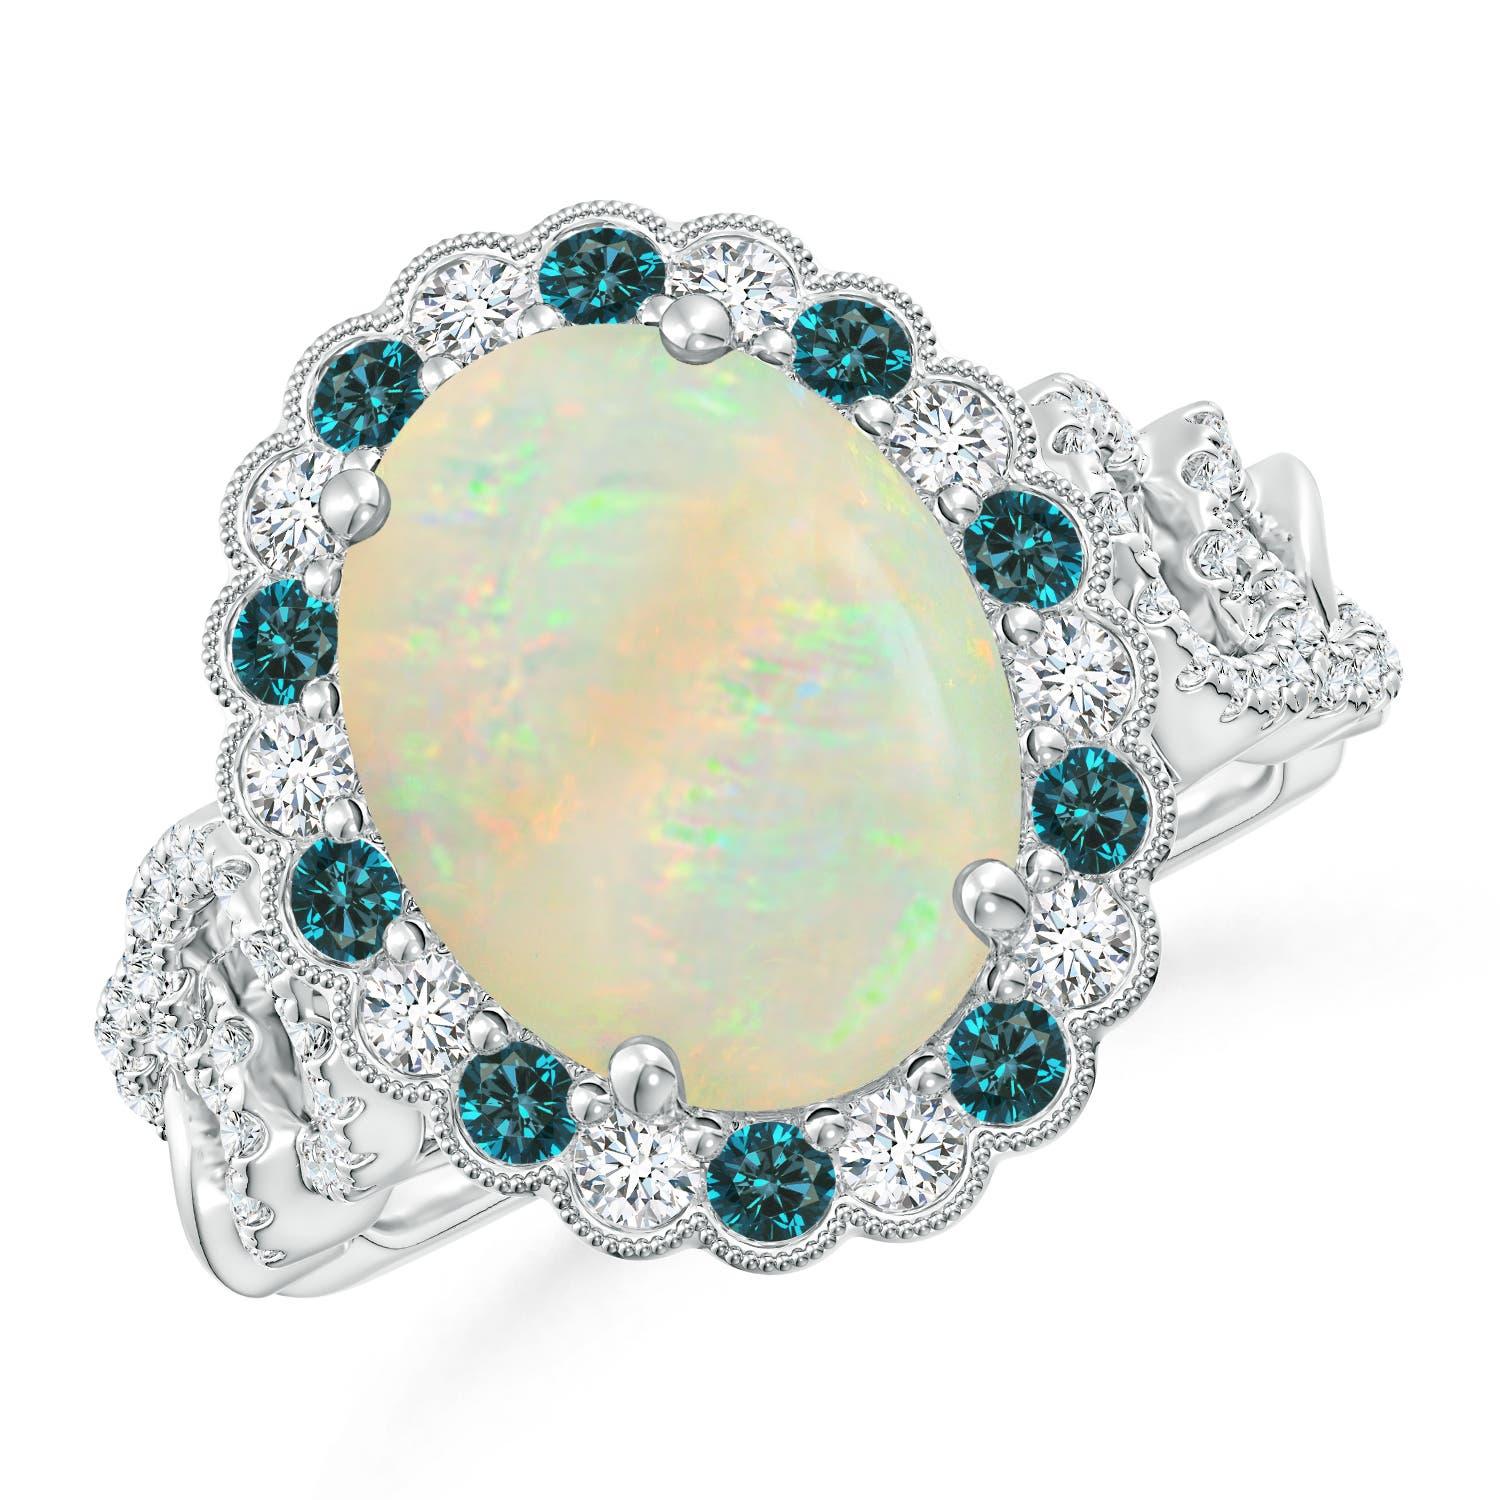 GIA Certified Natural Opal Ring in White Gold with Blue & White Diamonds